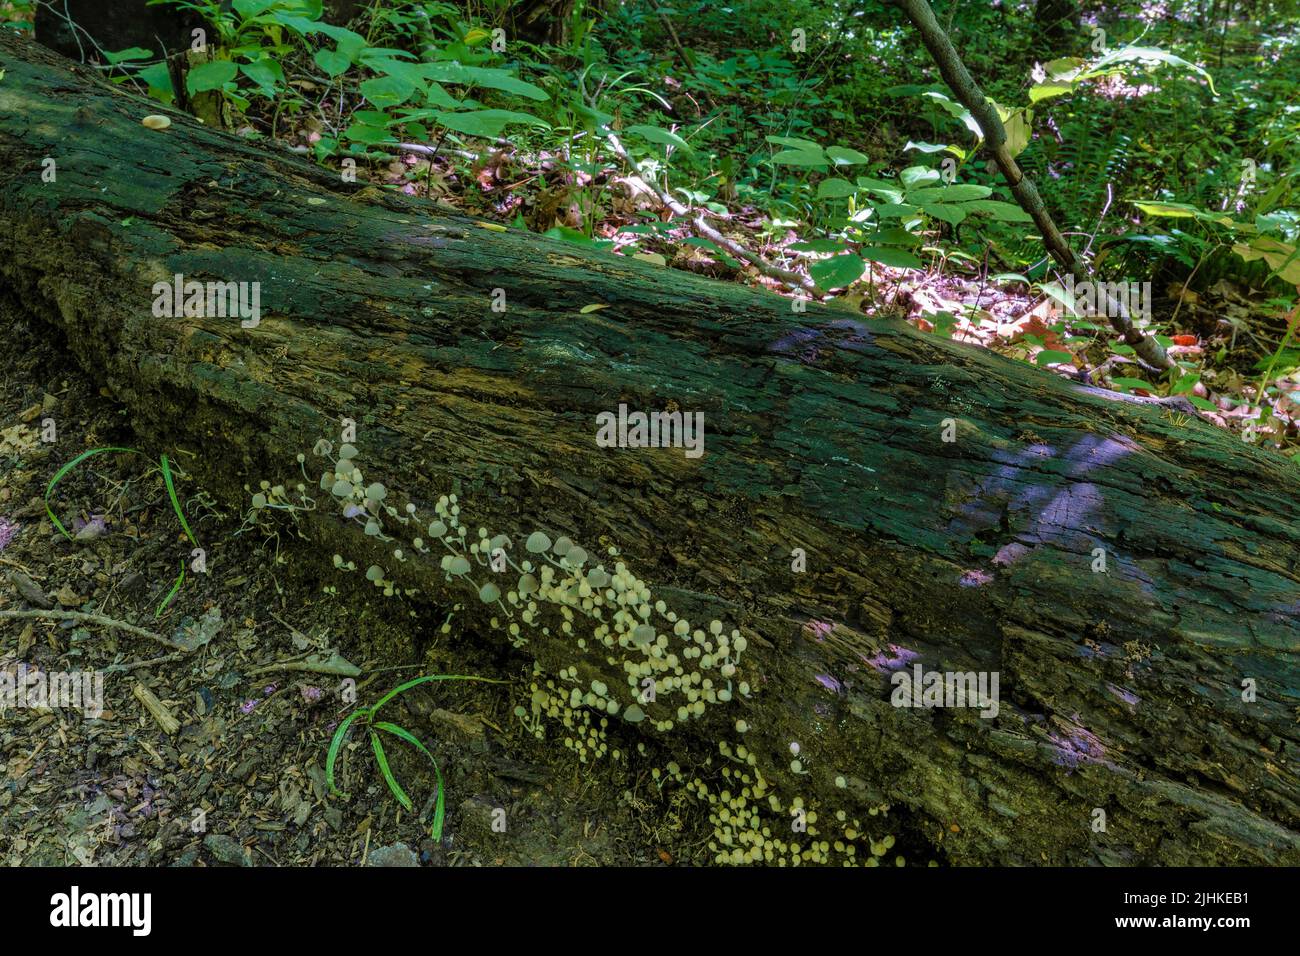 Close up of fungi, known as frosty bonnet growing on a down tree in a forest along side a hiking trail. Stock Photo